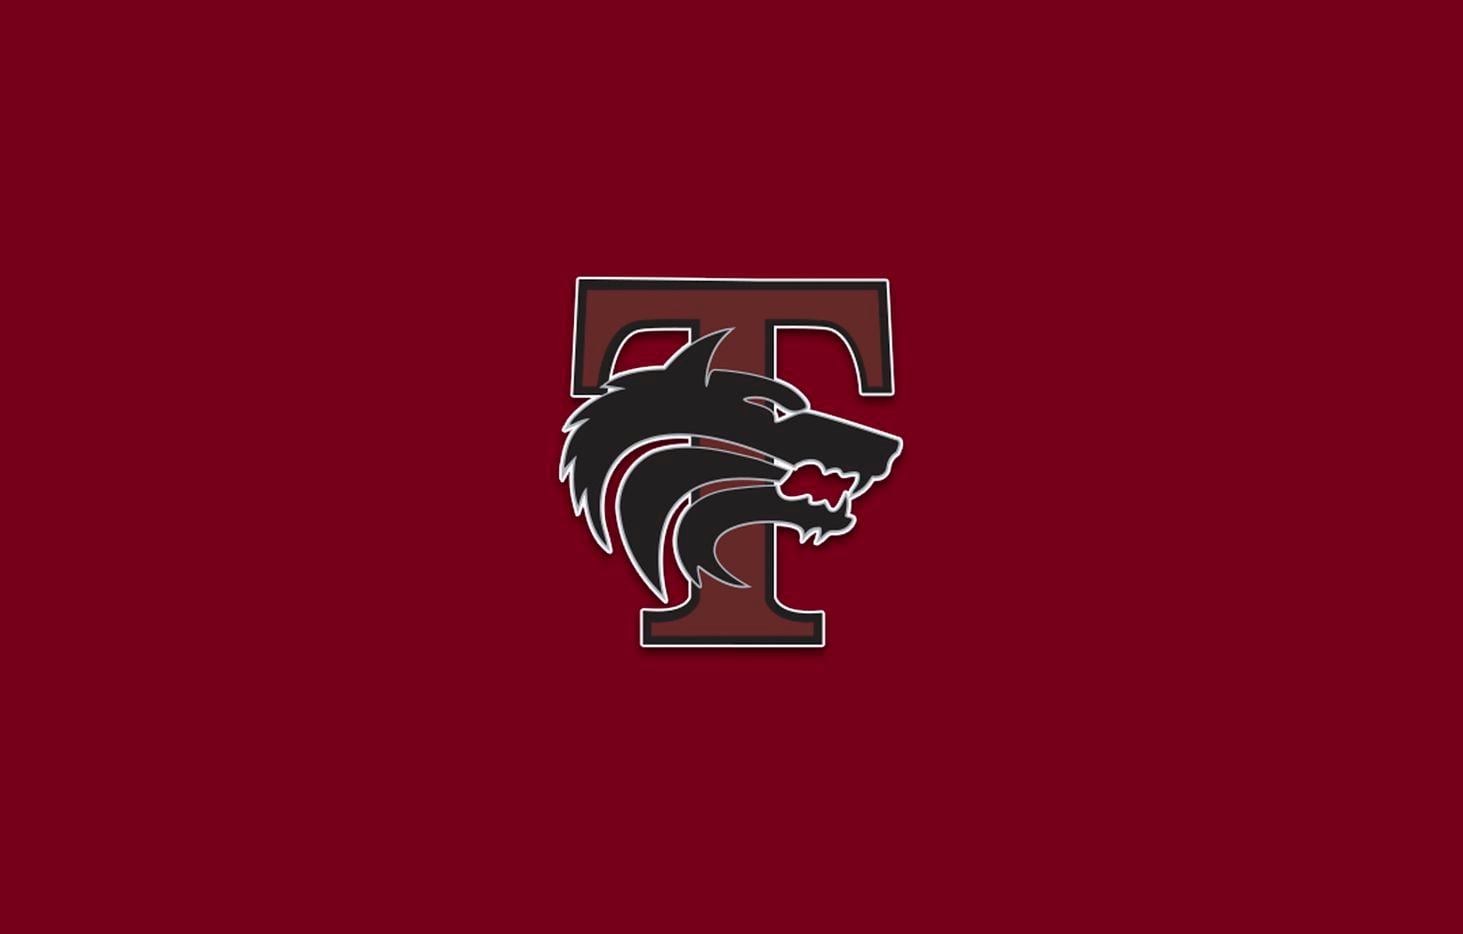 Mansfield Timberview logo.